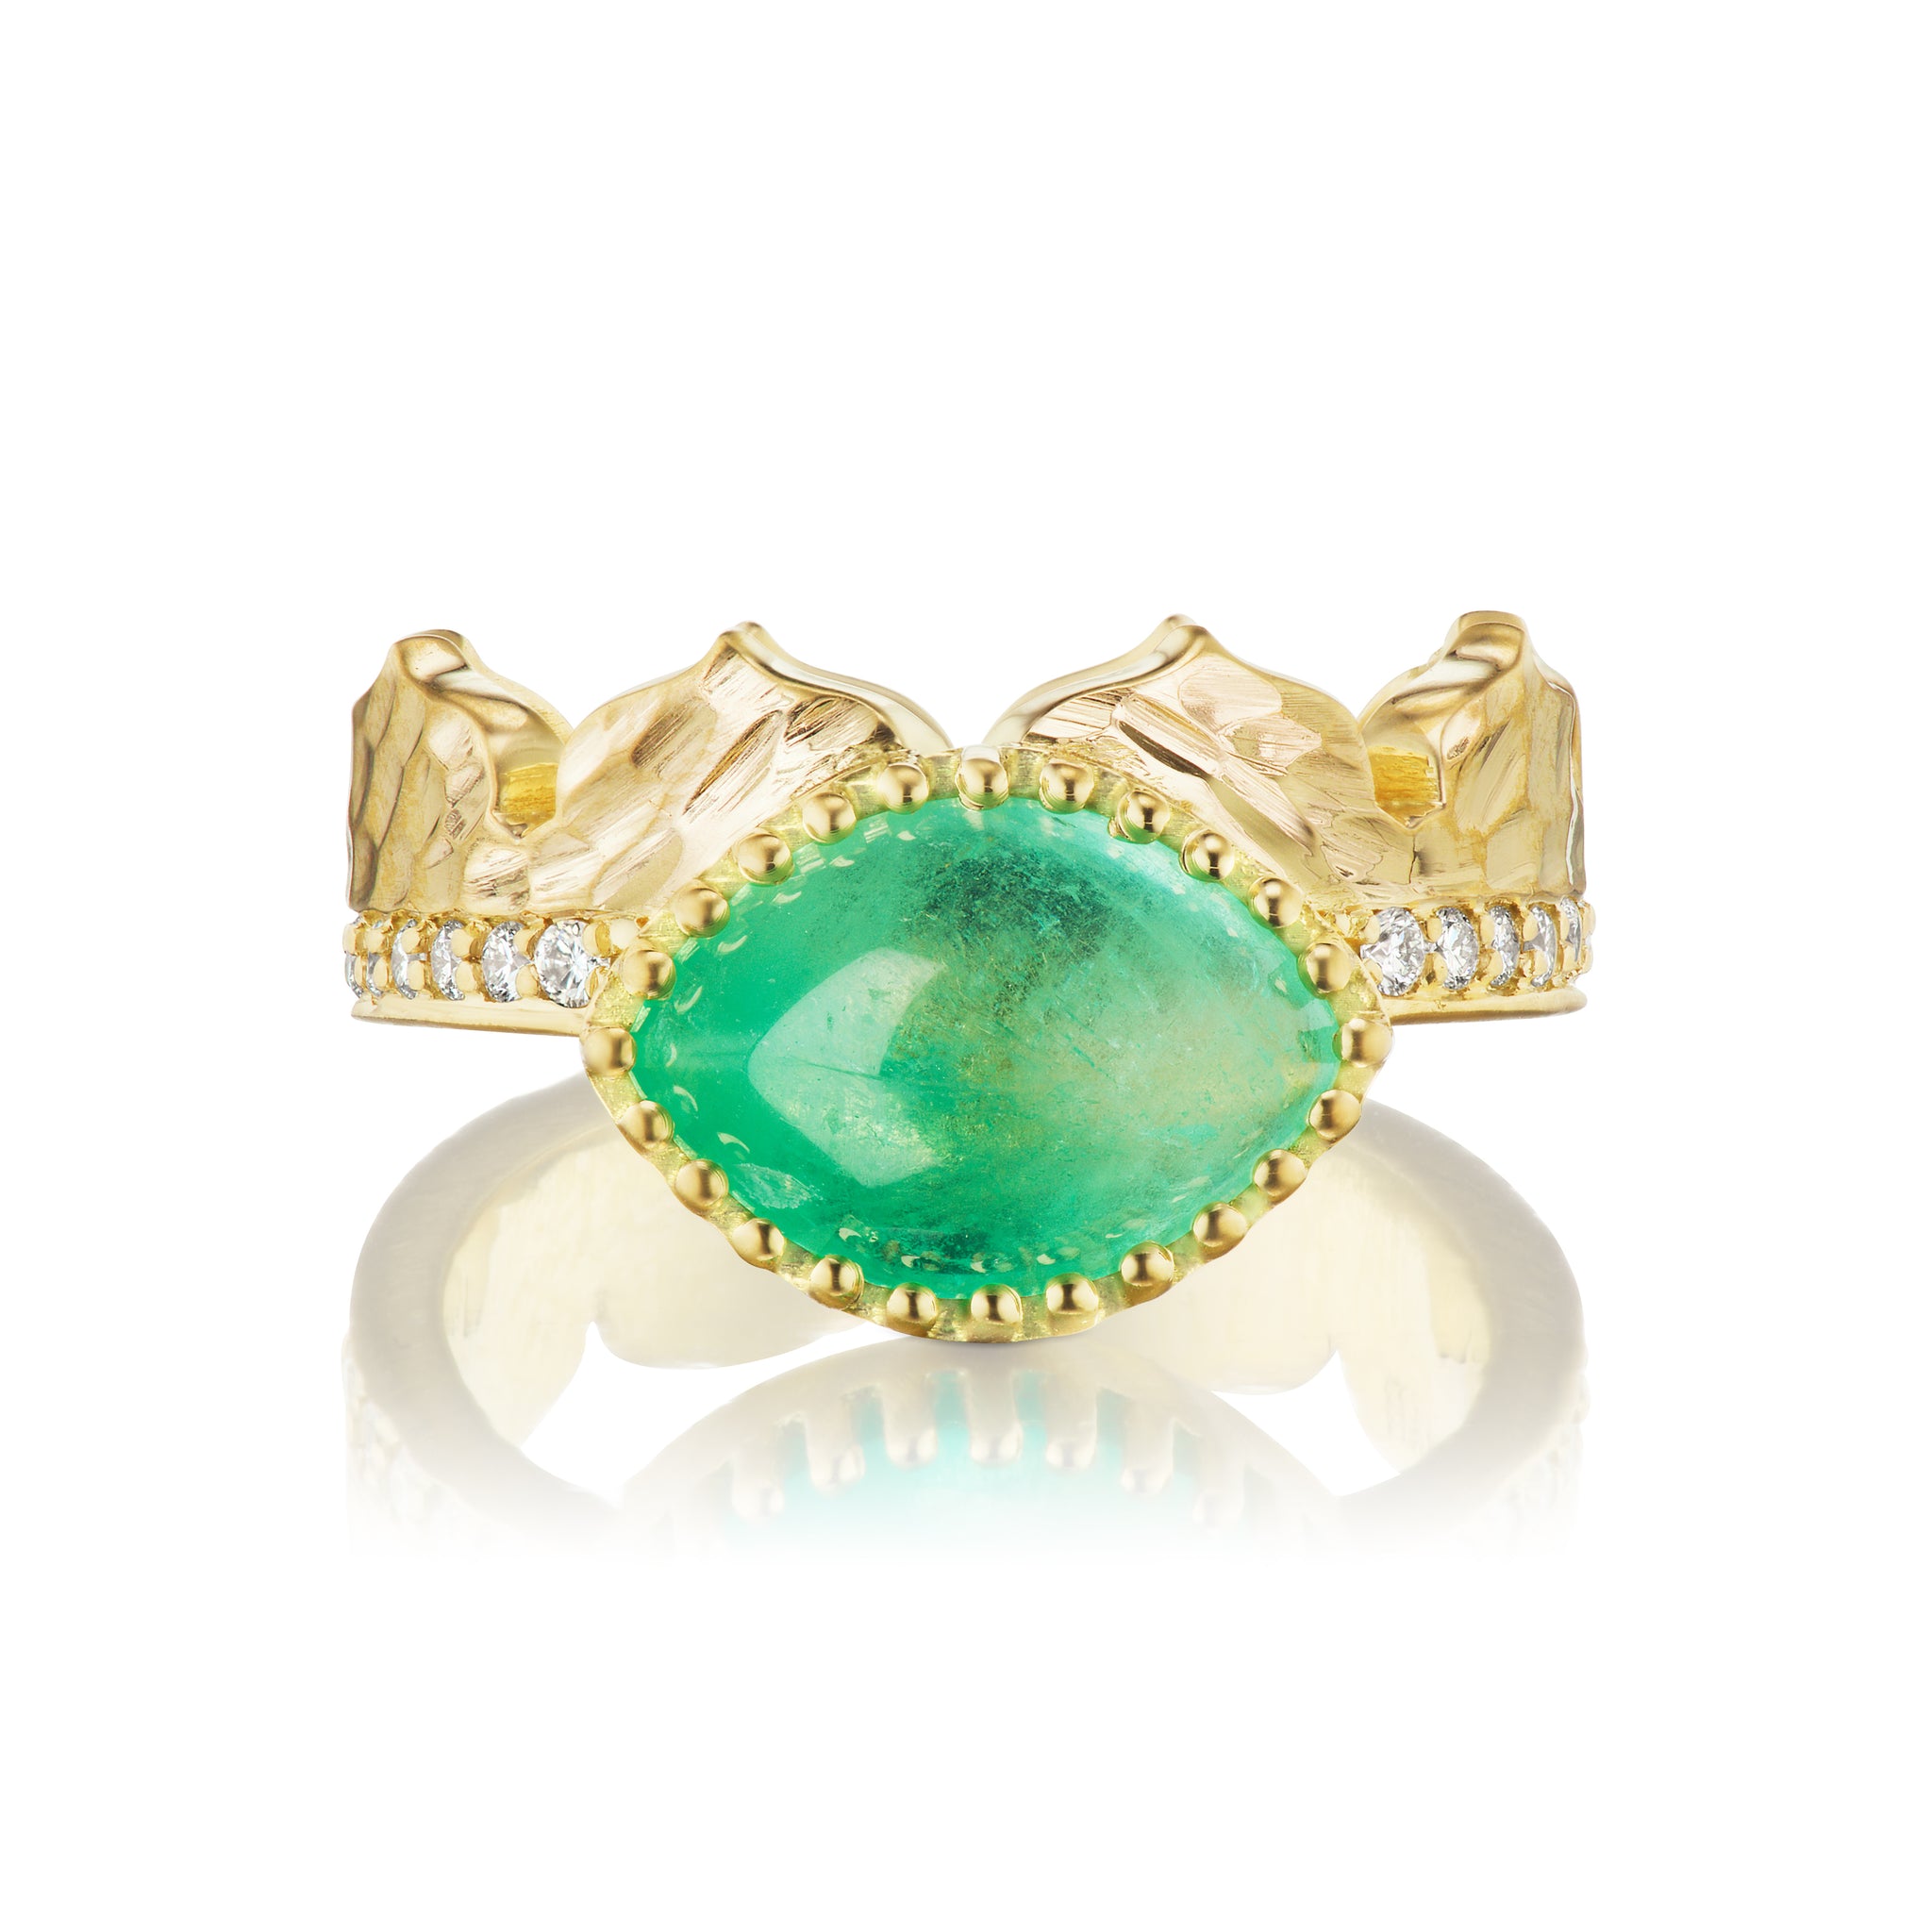 The new Emerald Agra Crown Ring featured on Harpers Bazaar